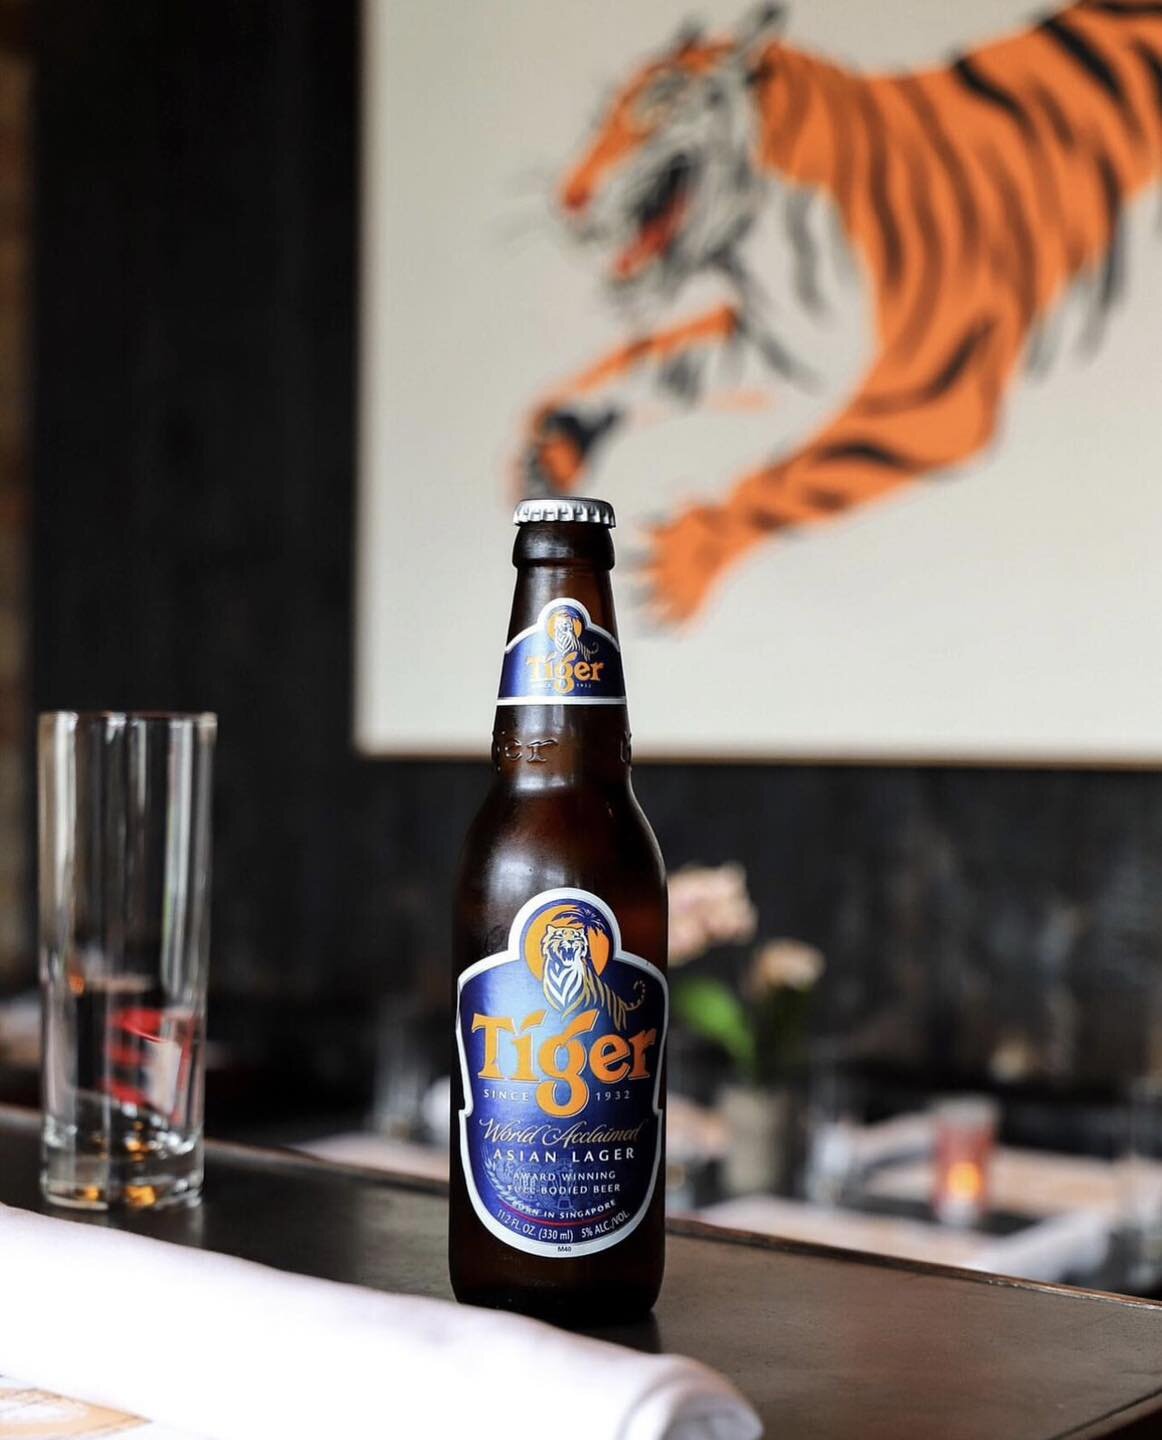 Eat &lsquo;em up Tigers! Swing by and celebrate with a beer! Pro tip: Free street parking and WAY better food! 🤗

#ThePeterboro #DetroitVibes #DetroitTigers #OpeningDay